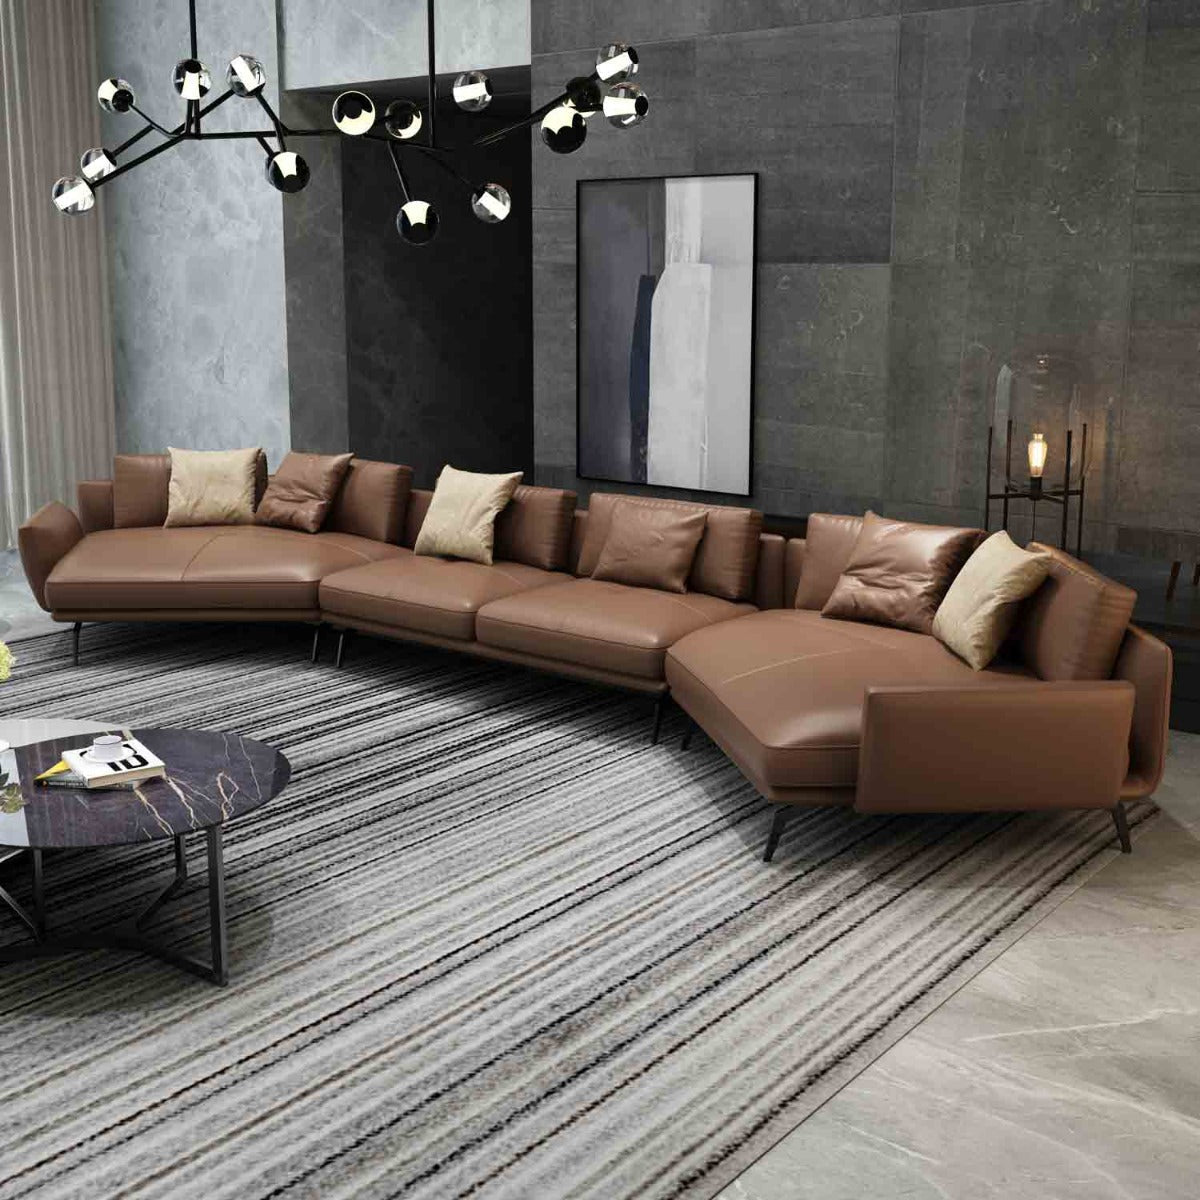 European Furniture - Venere 6 Seater Sectional in Russet Brown - 65551-6S - New Star Living